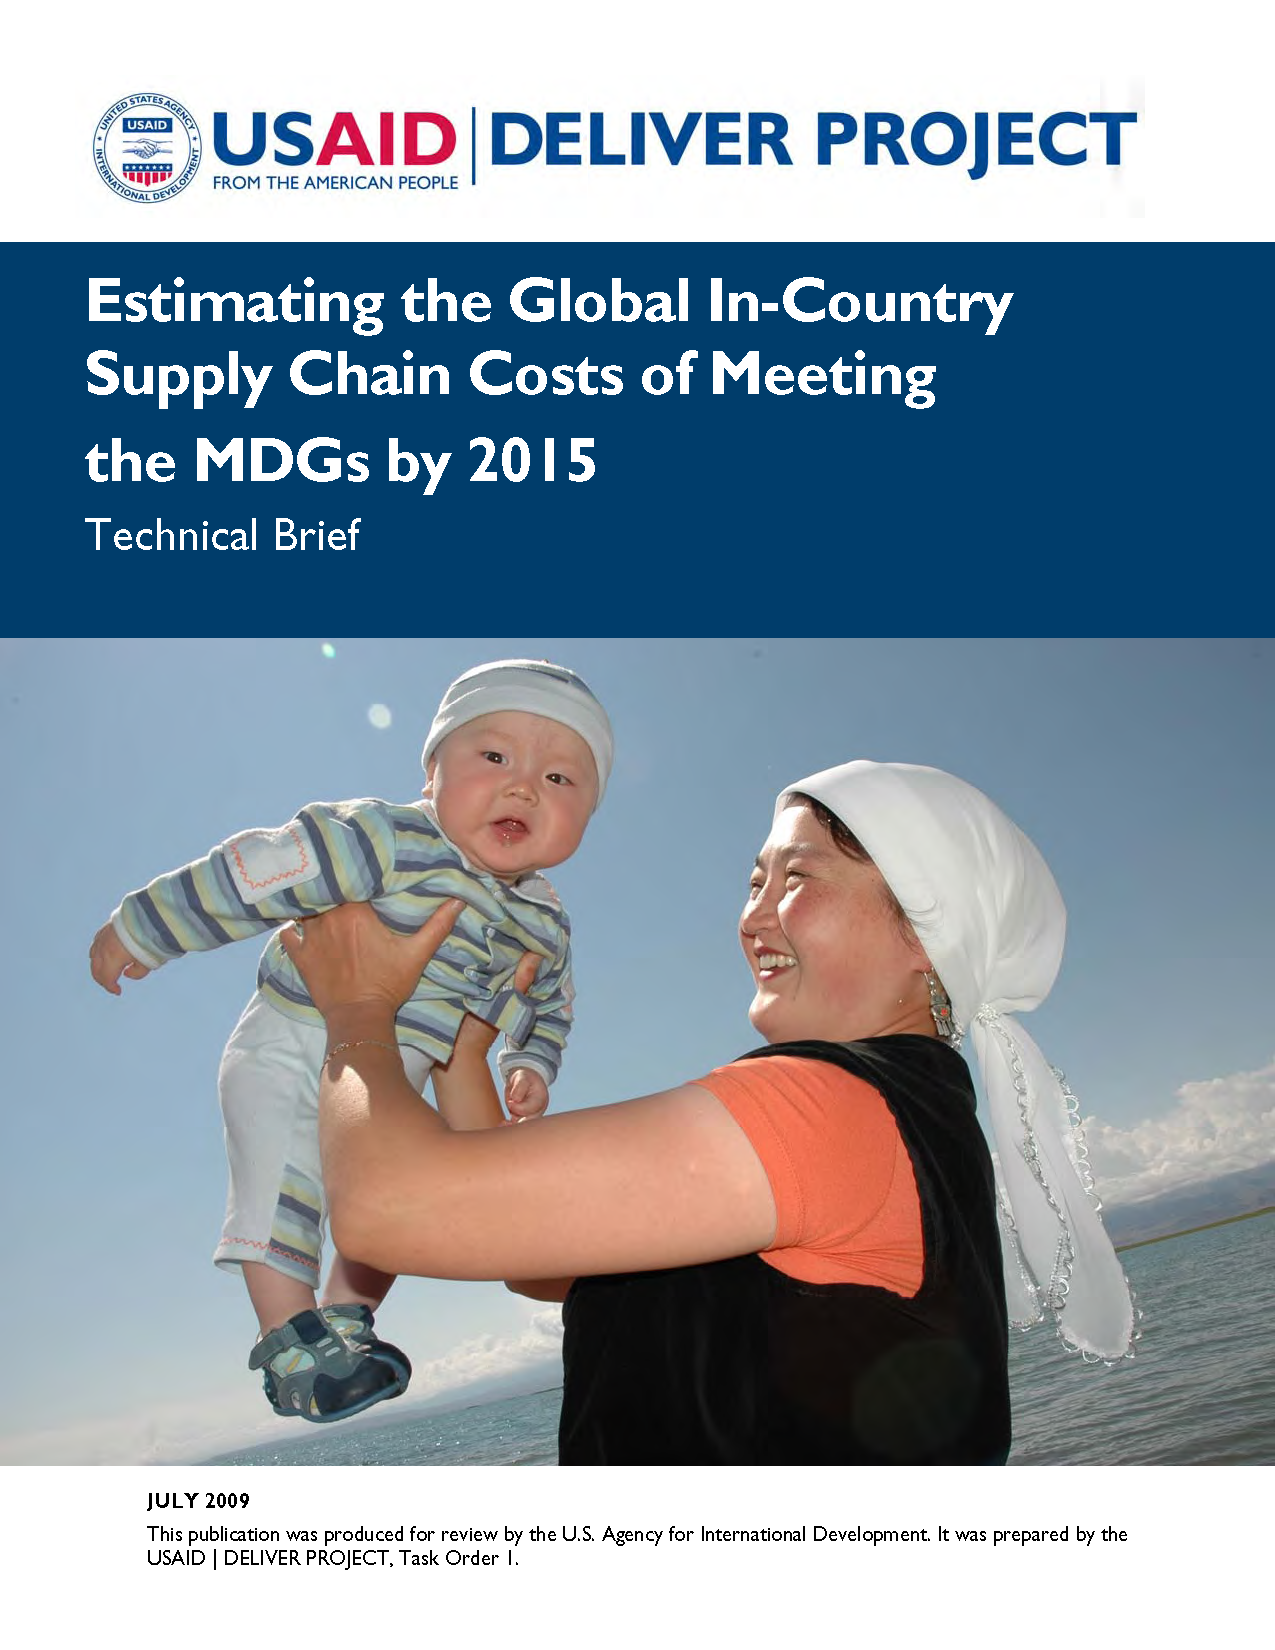 Cover Estimating Global In-Country Supply Chain Costs of Meeting the MDGs